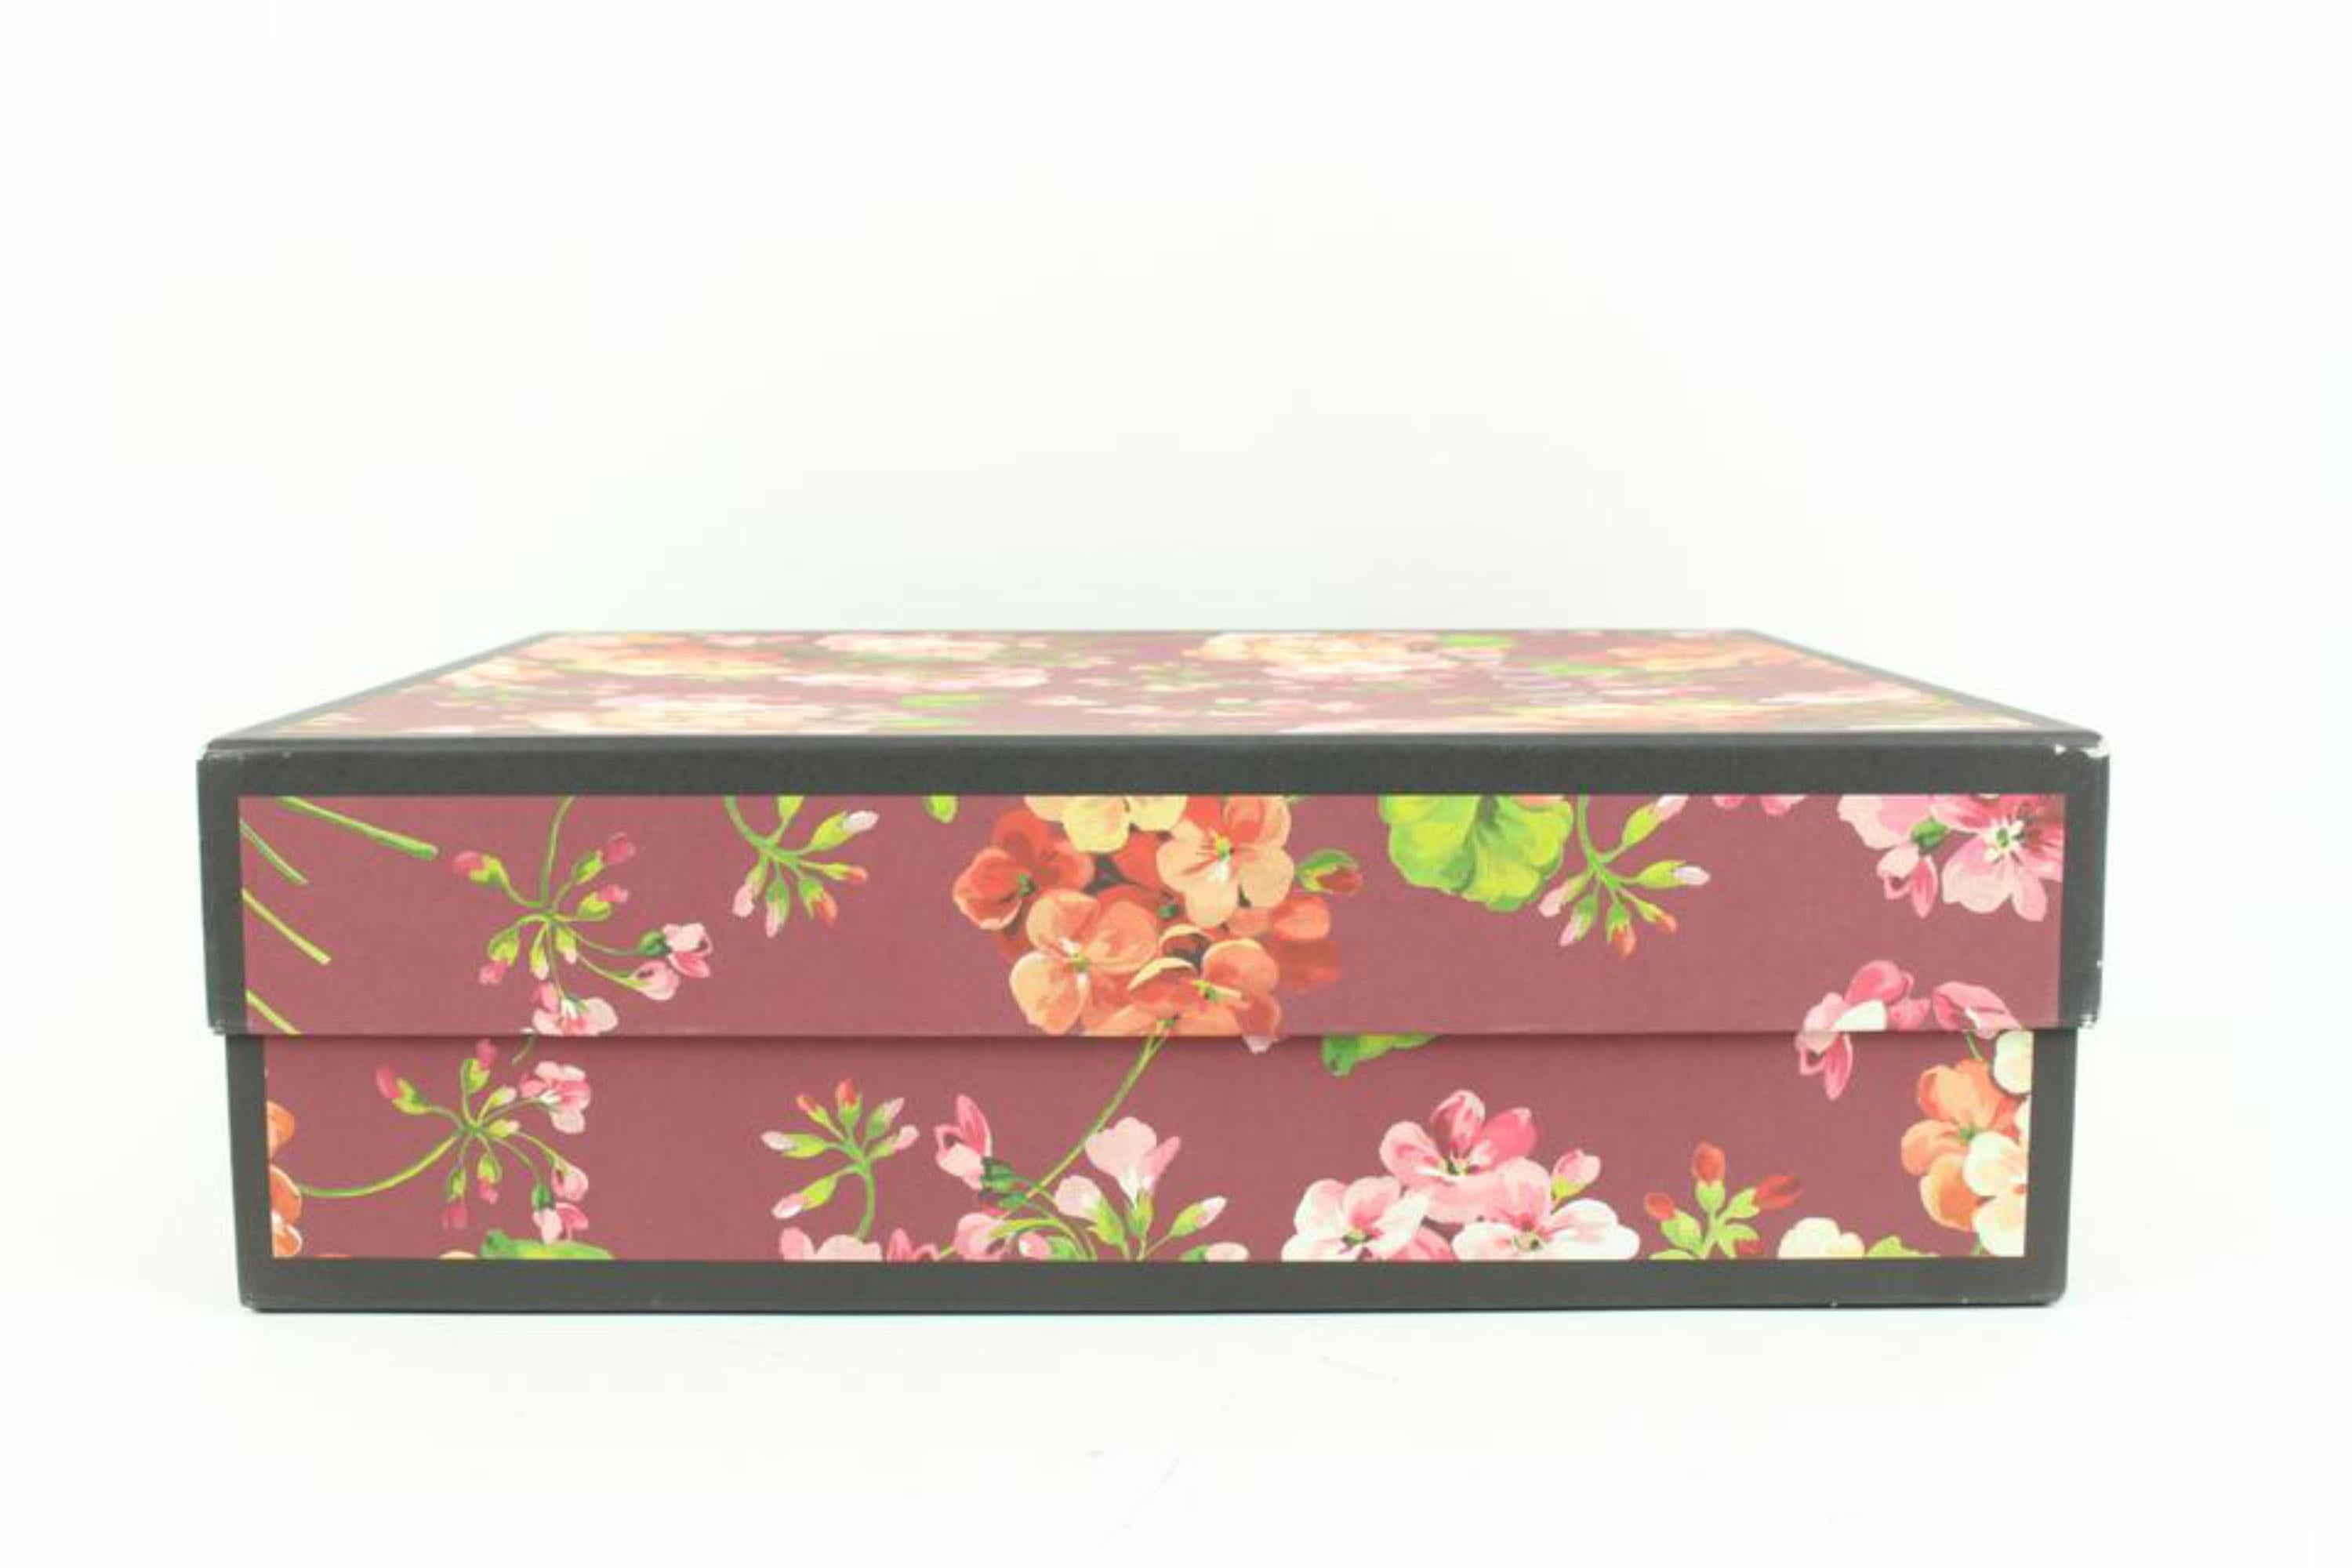 Gucci Limited Edition Blooms Box Case Floral Flower 15g419s 1